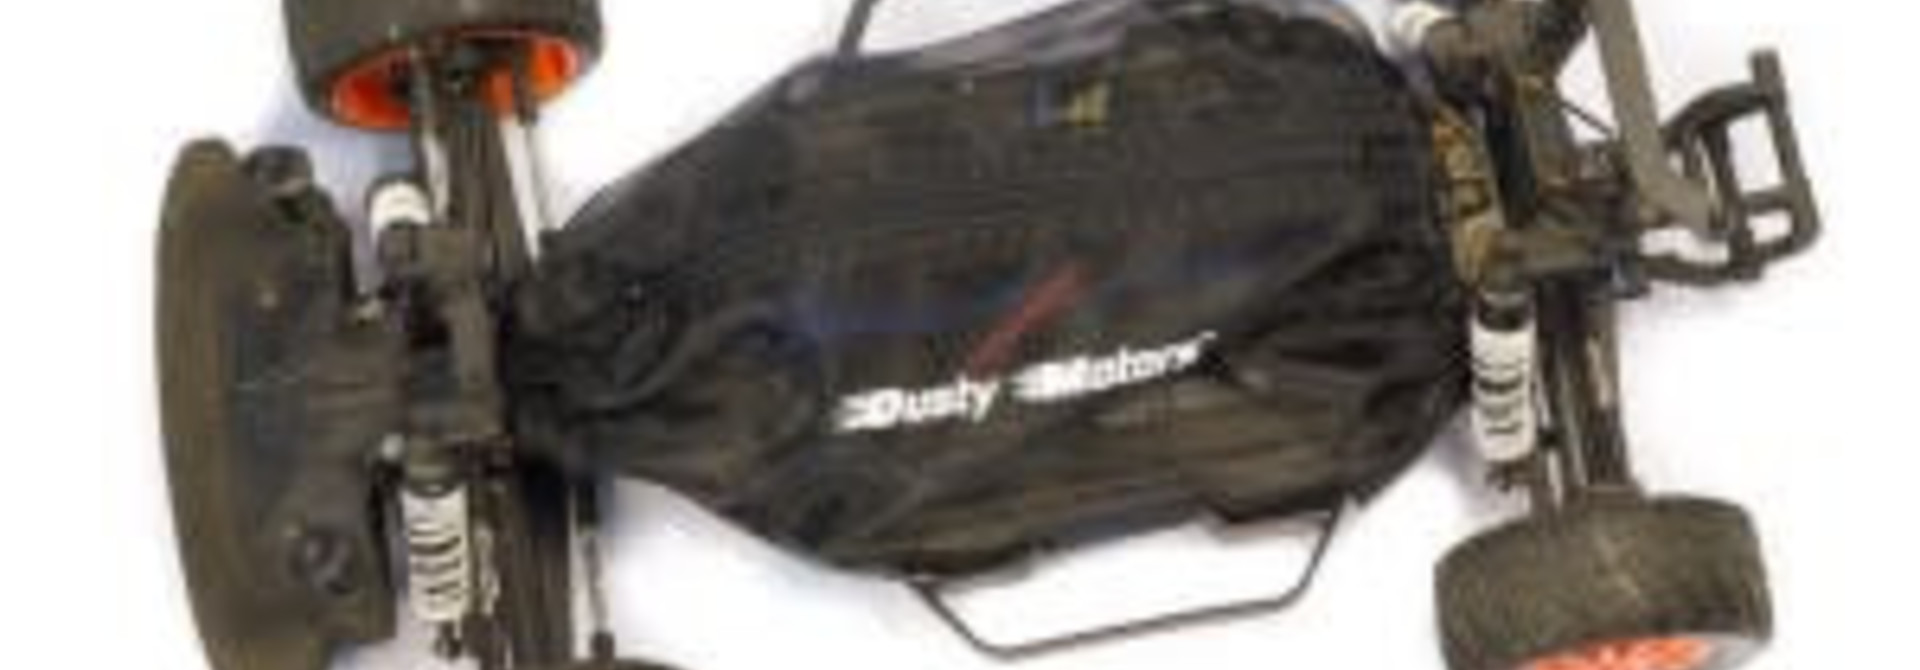 Dusty Motors Universal adjustable protection cover size S+, DMC1010